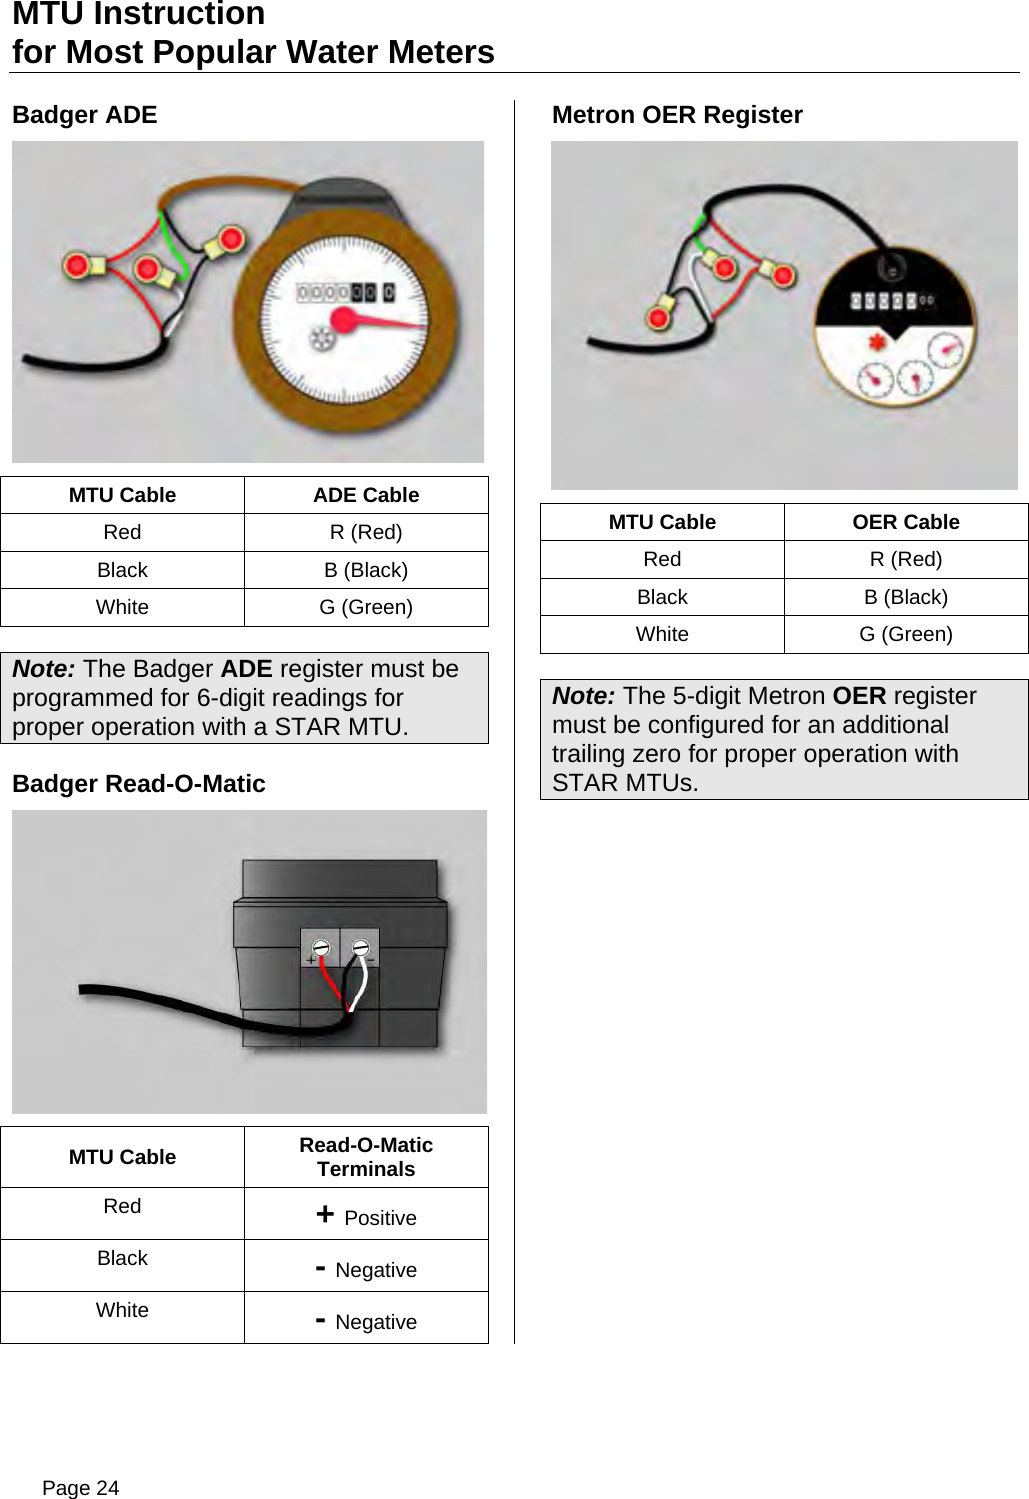 Page 24 of Aclara Technologies 09015 Transmitter for Meter Reading User Manual users manual